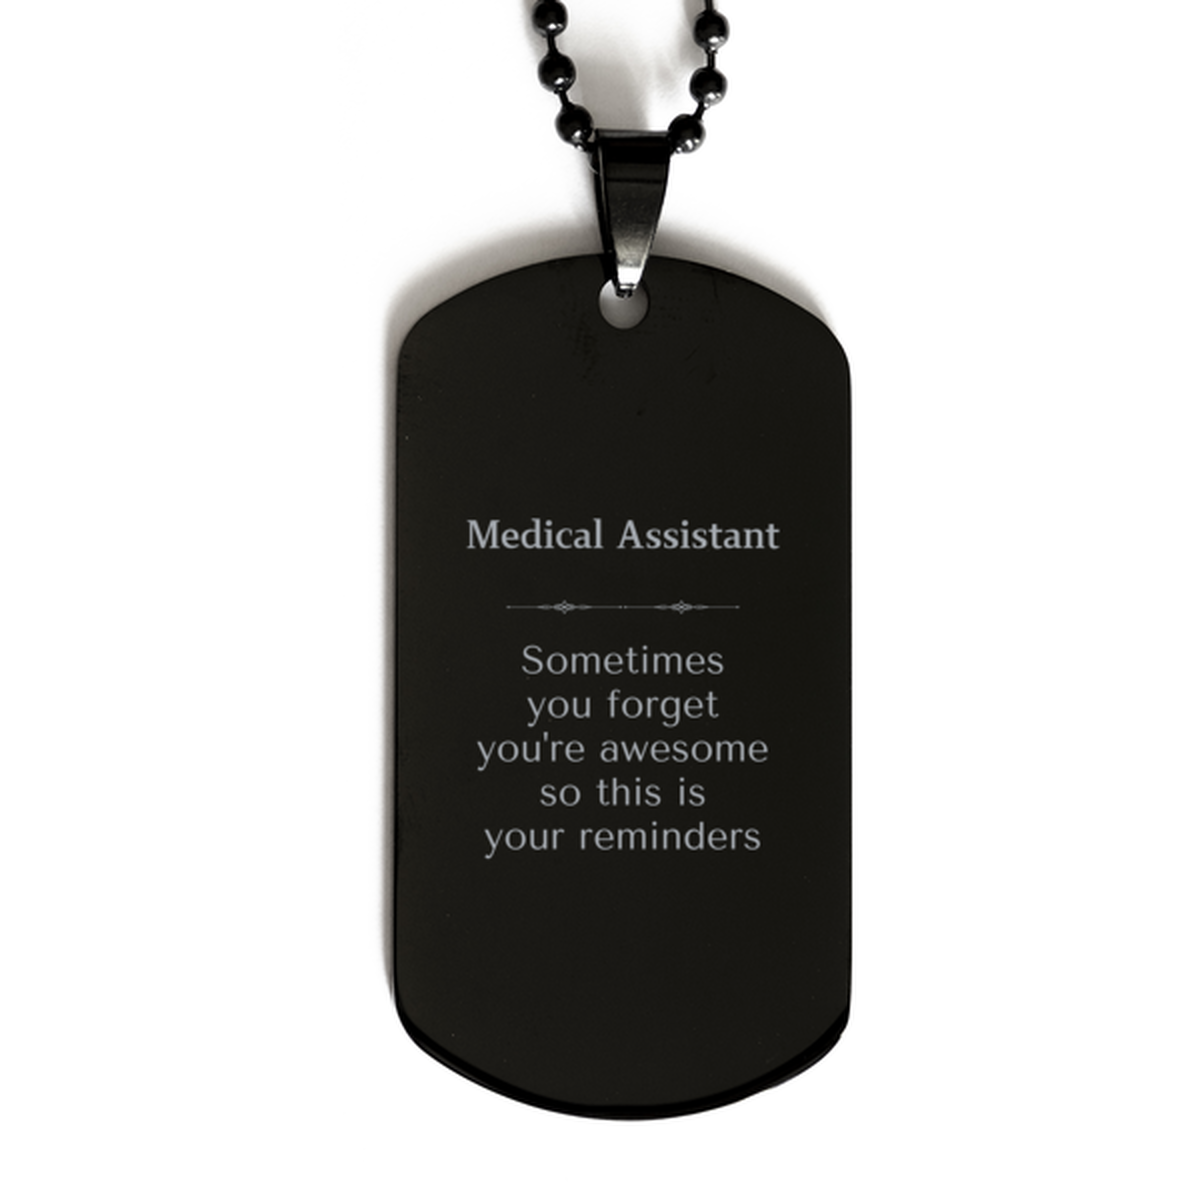 Sentimental Medical Assistant Black Dog Tag, Medical Assistant Sometimes you forget you're awesome so this is your reminders, Graduation Christmas Birthday Gifts for Medical Assistant, Men, Women, Coworkers